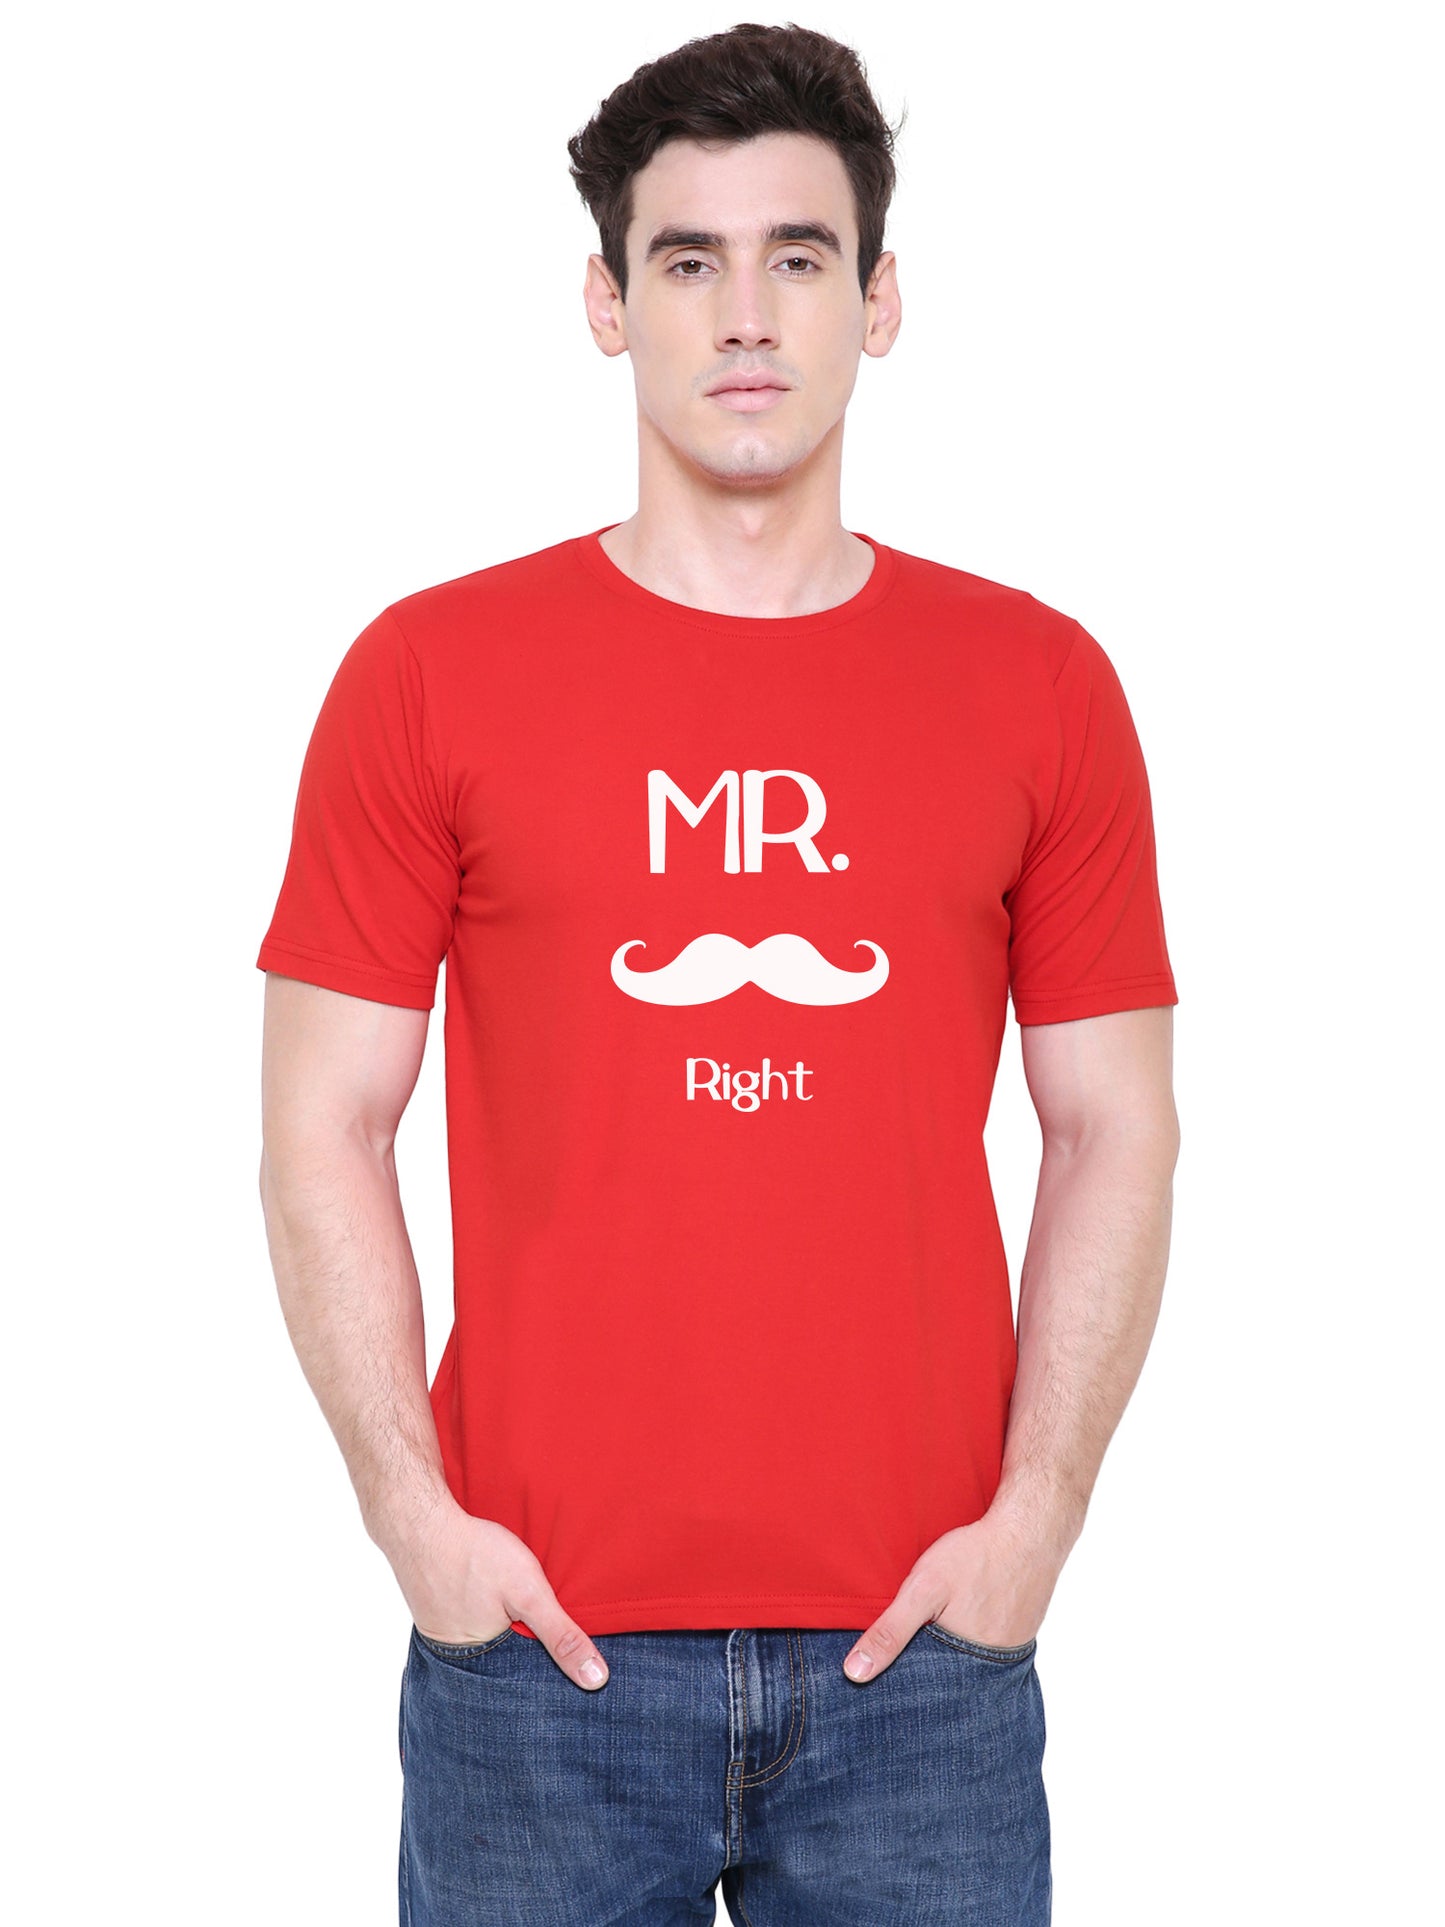 Mr. Mrs. Always Right matching Couple T shirts- Red